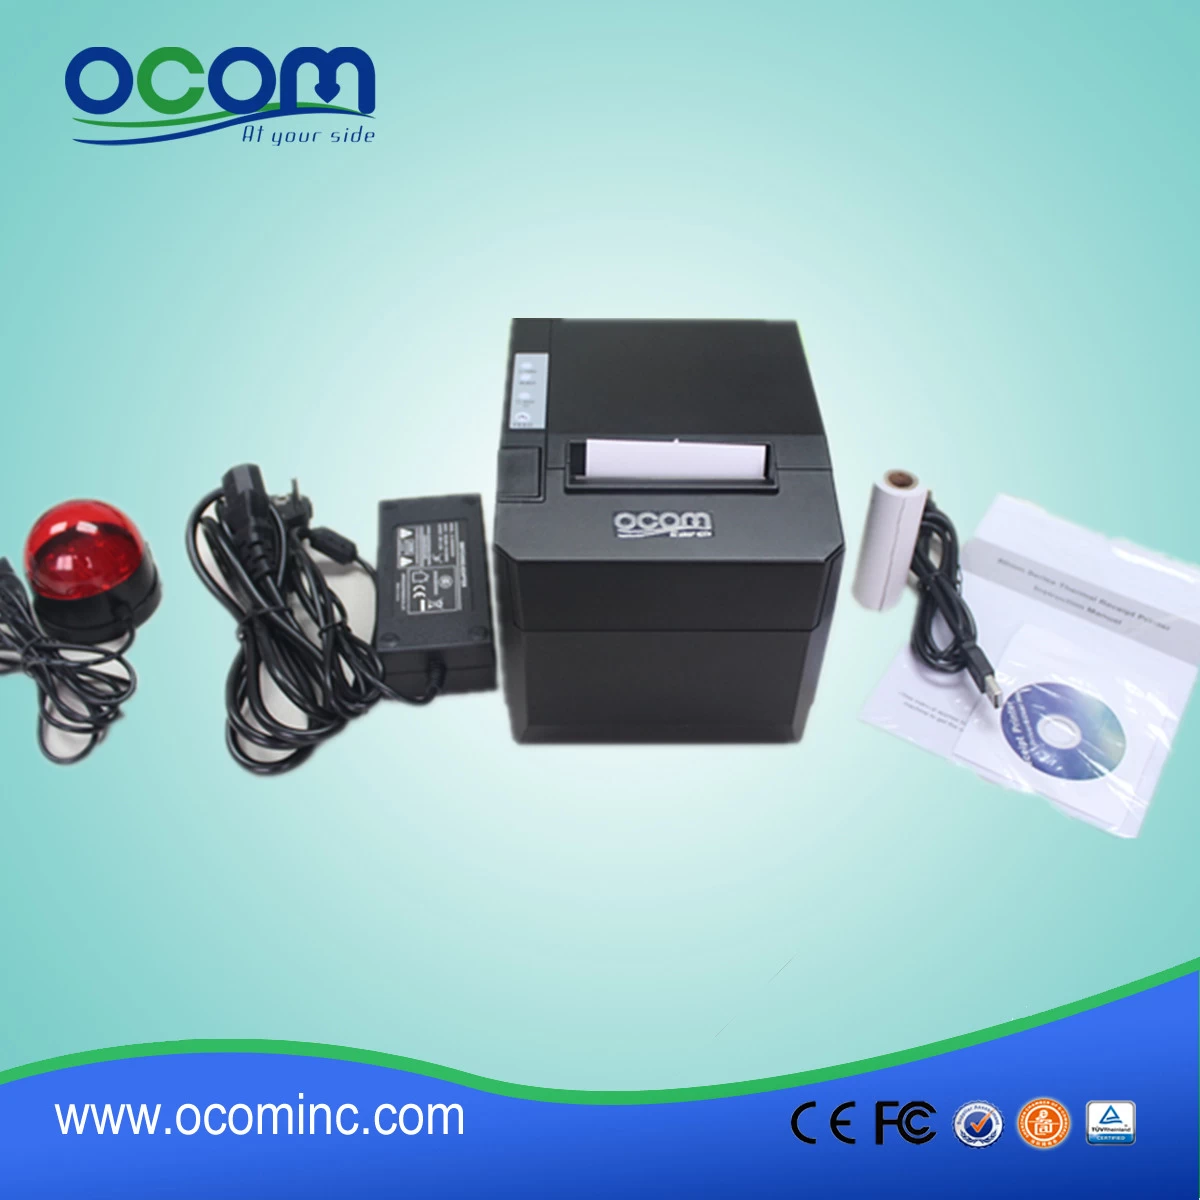 80mm receipt printer for POS bill with auto cutter (OCPP-88A)